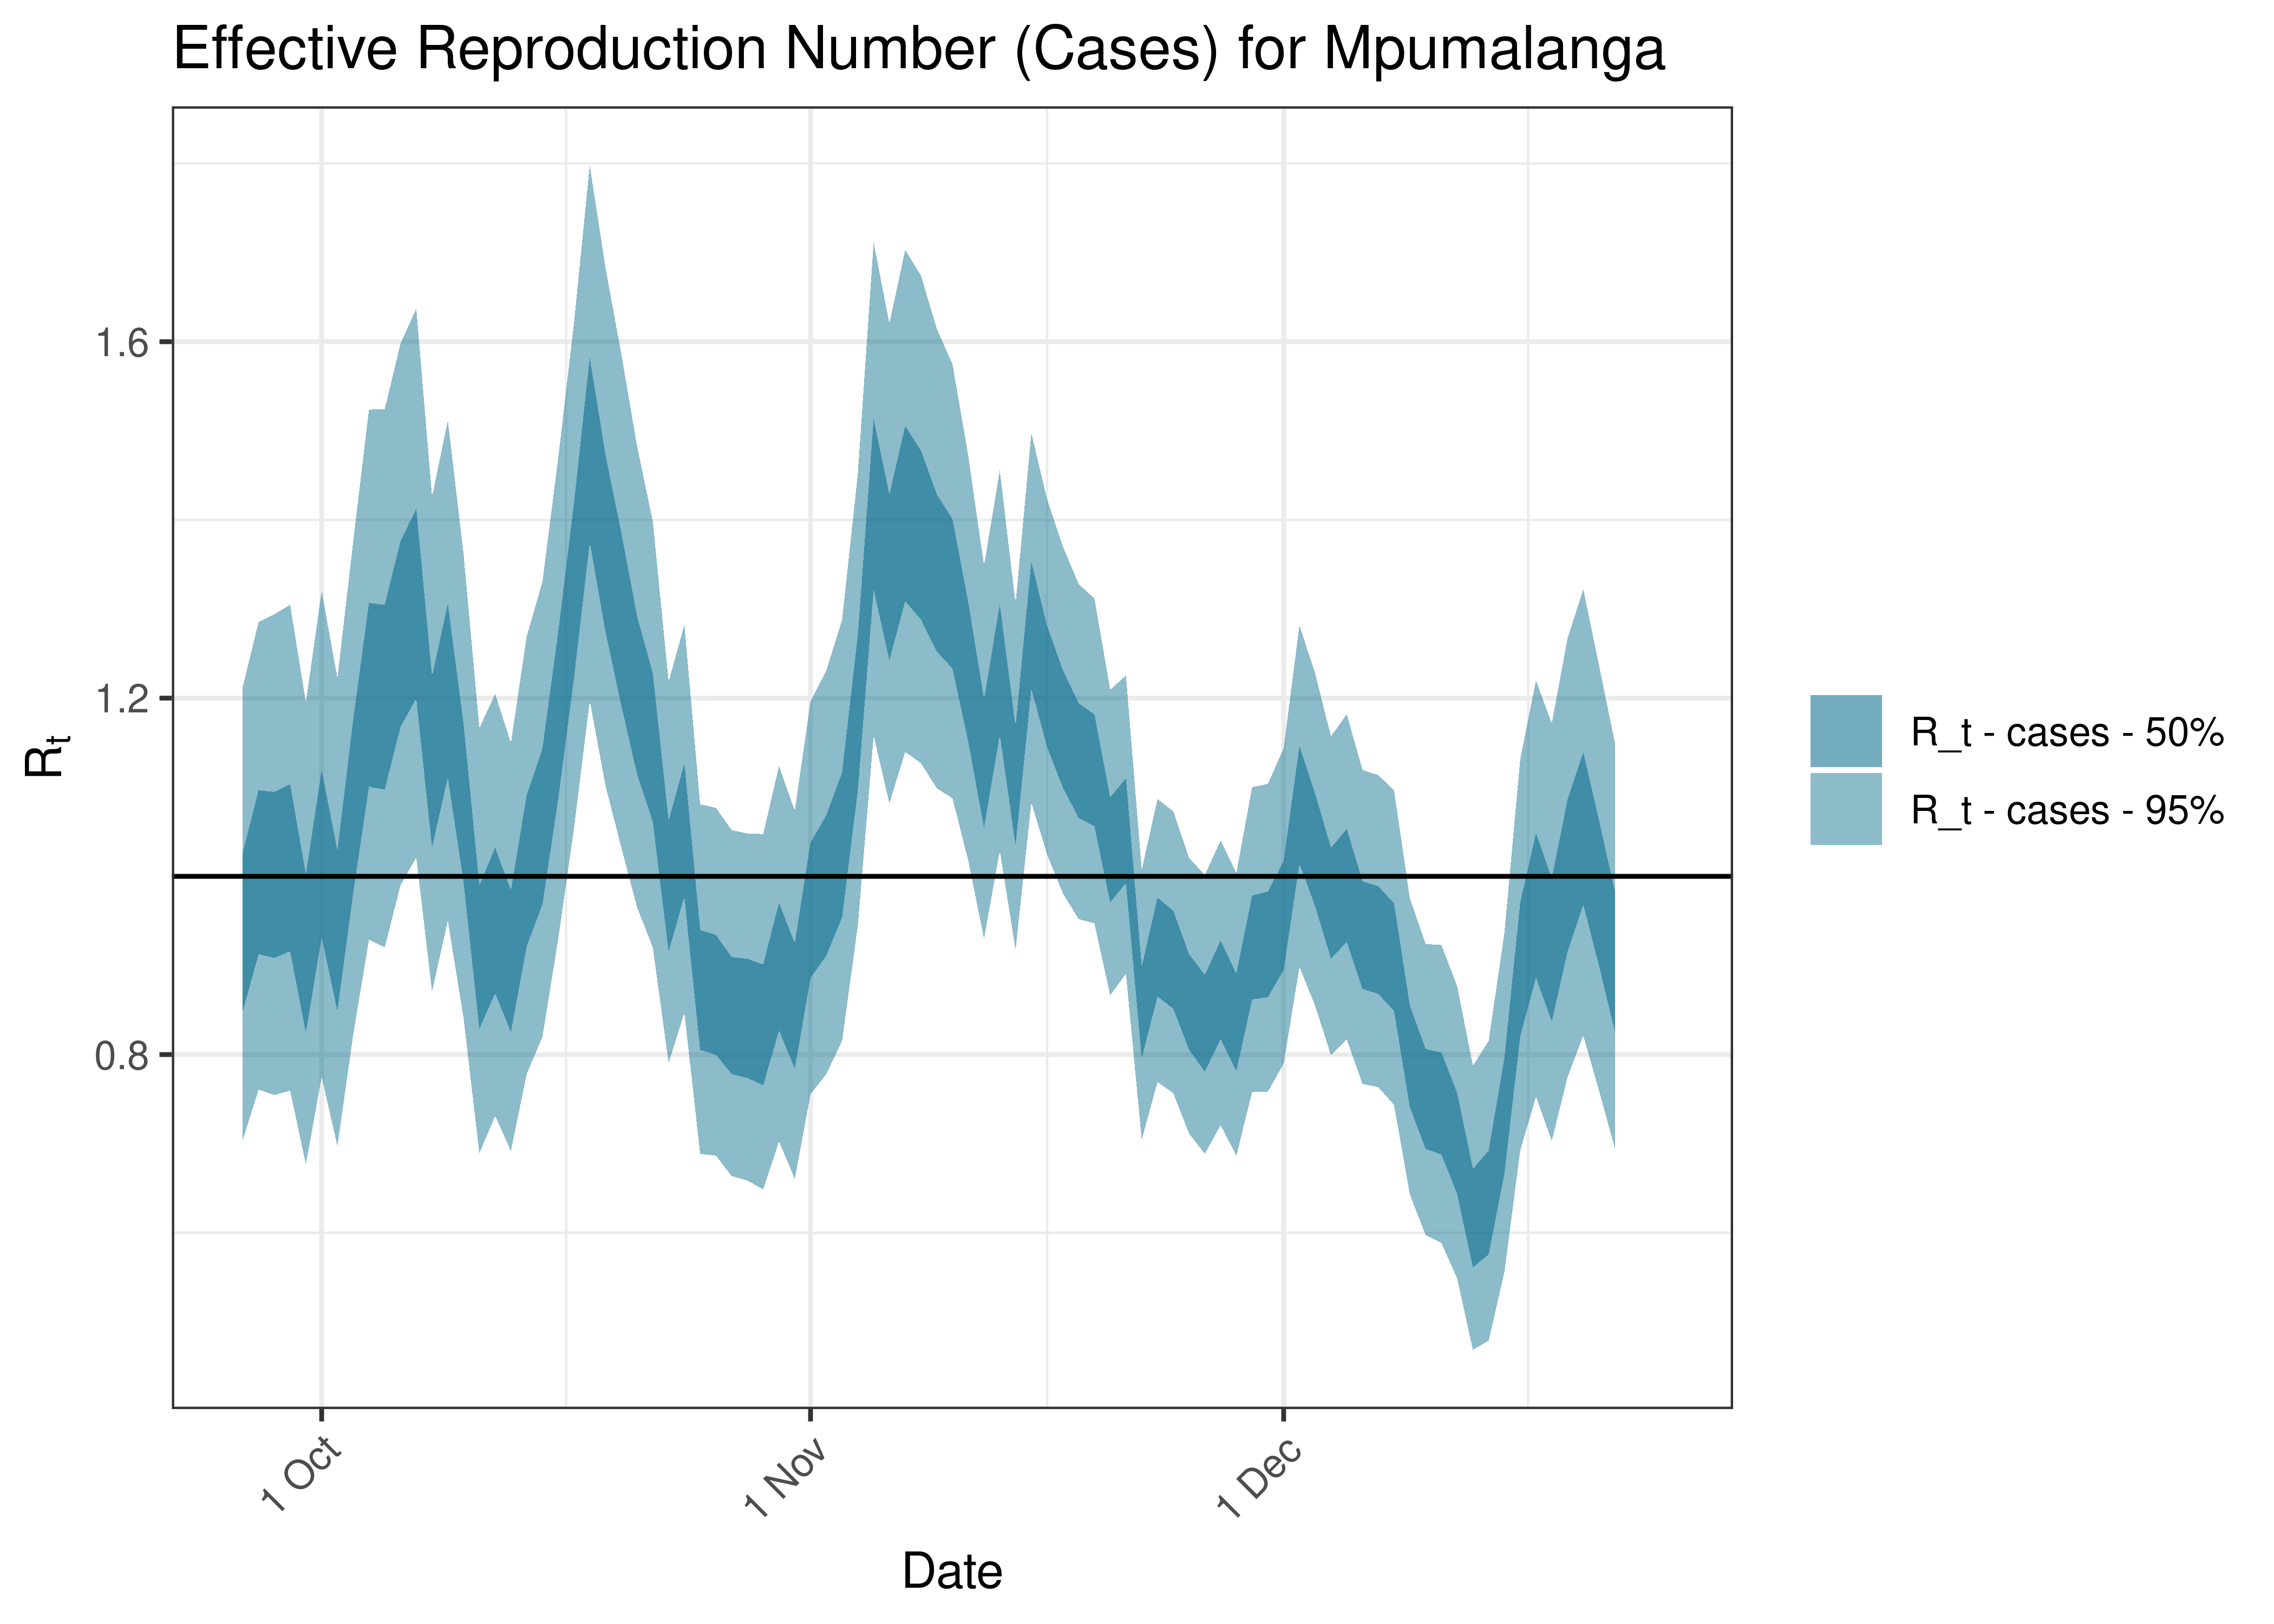 Estimated Effective Reproduction Number Based on Cases for Mpumalanga over last 90 days